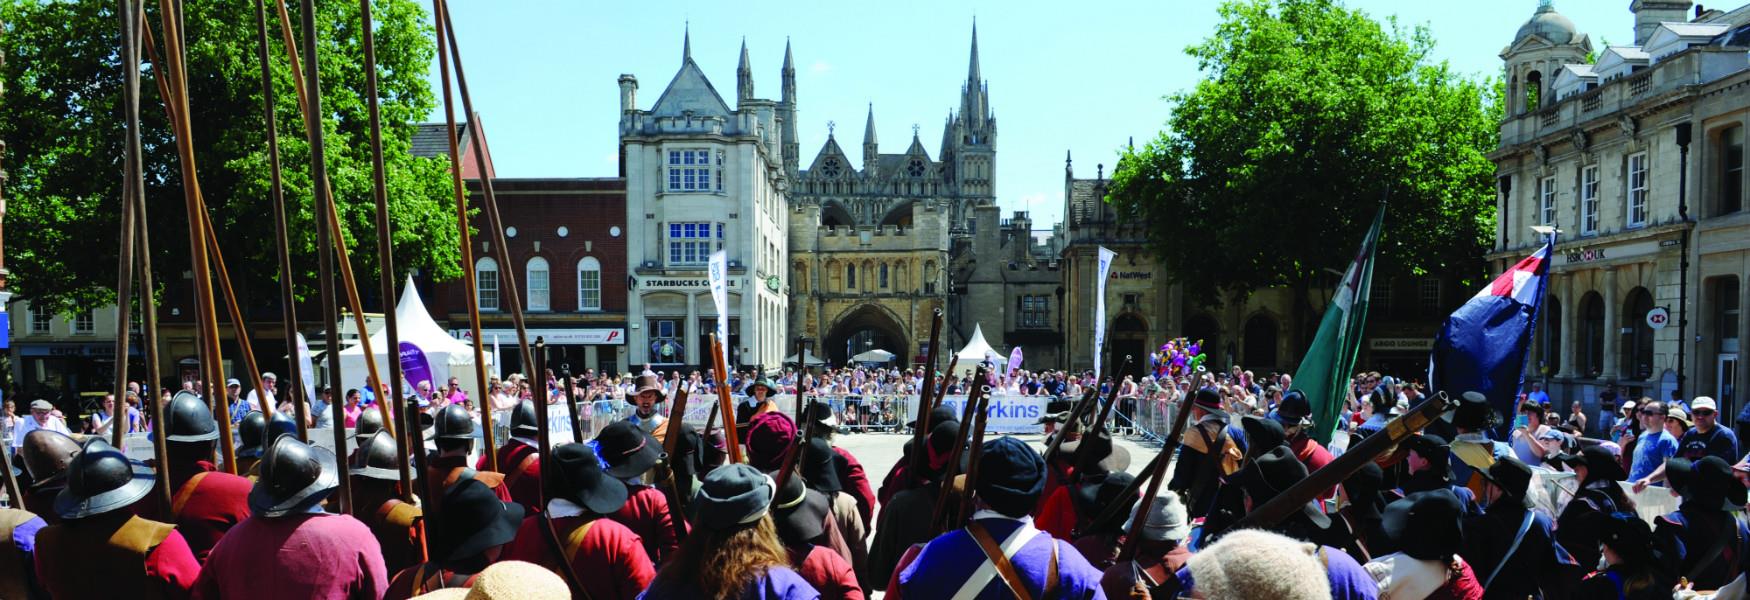 Old English civil war reenactment in Cathedral Square